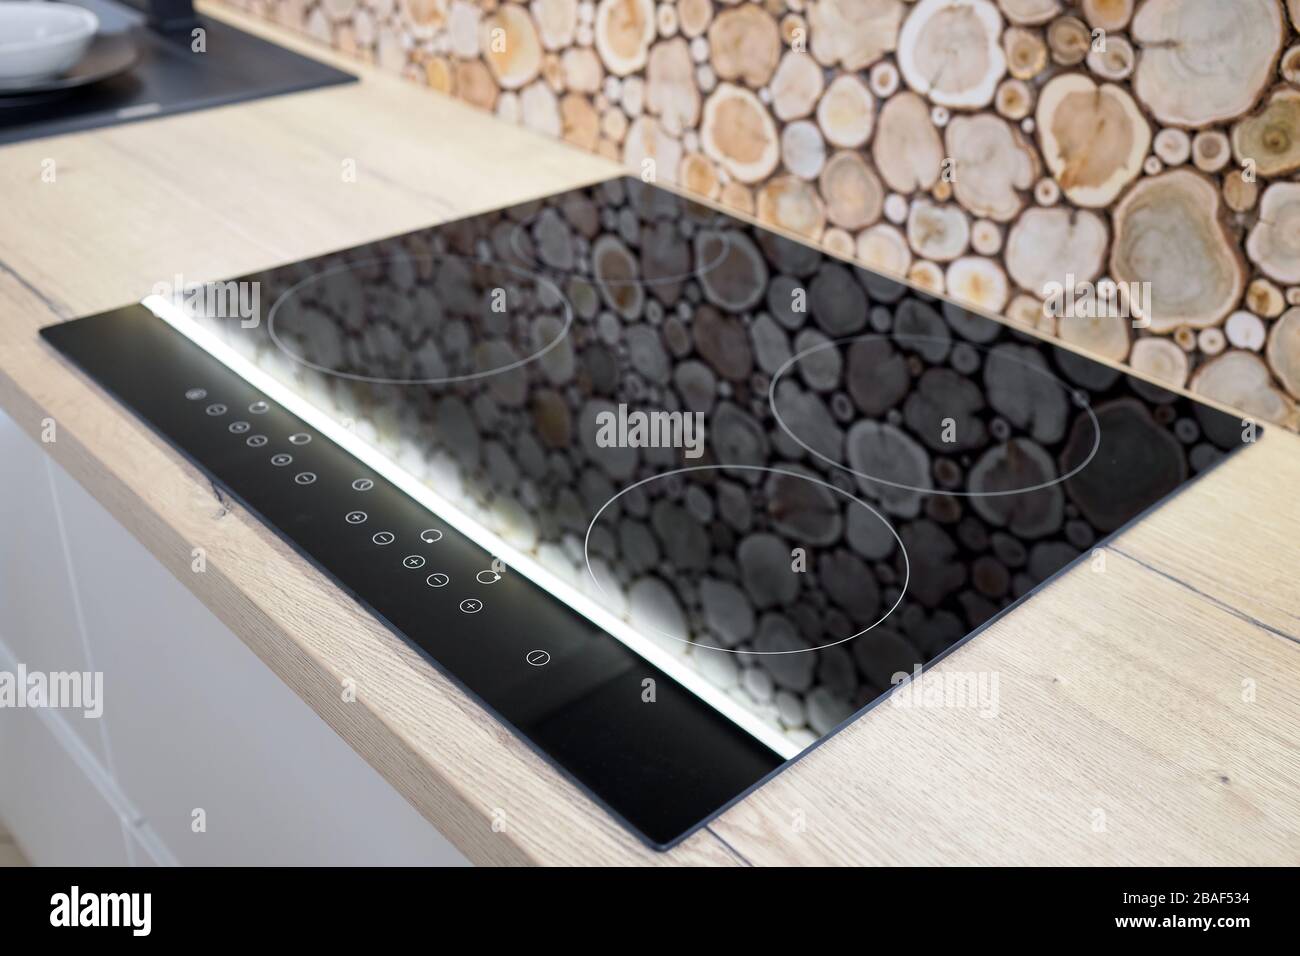 rumor Western spur Modern kitchen interior with black induction stove, cooker, hob or built in  cooktop with ceramic top surface behind the countertop decorated with wall  Stock Photo - Alamy